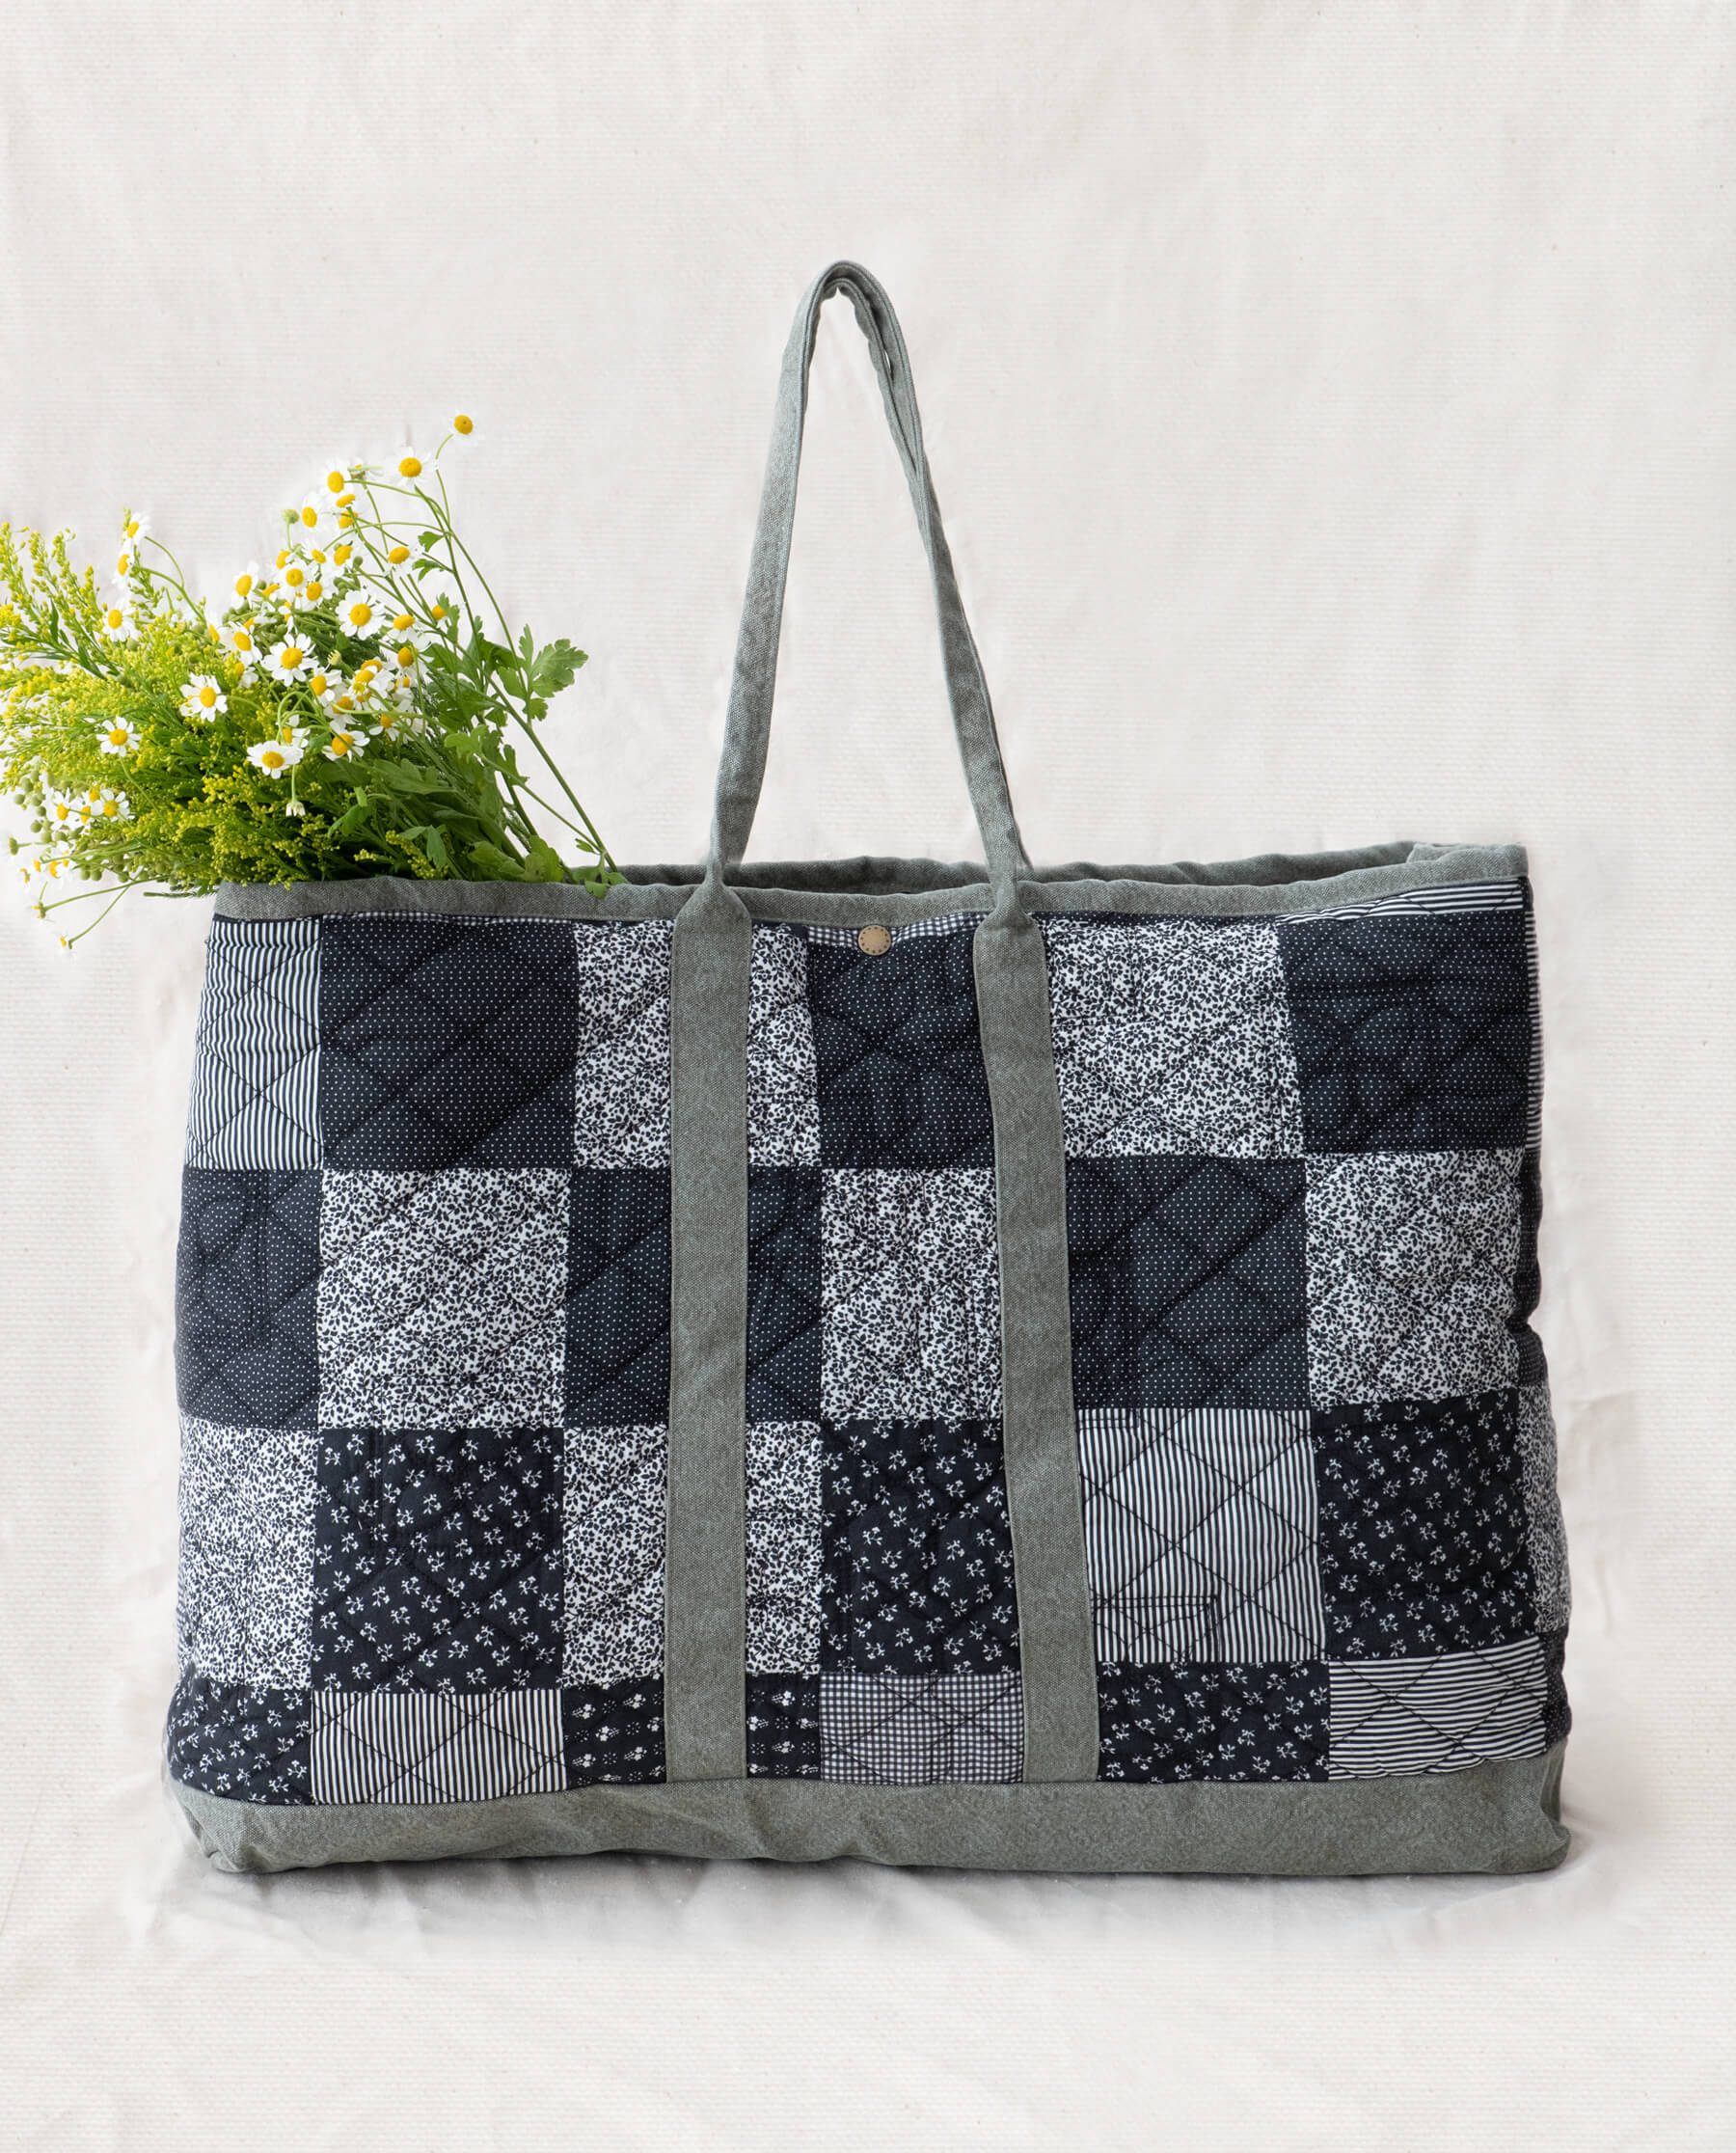 Introducing the new Padded Tote